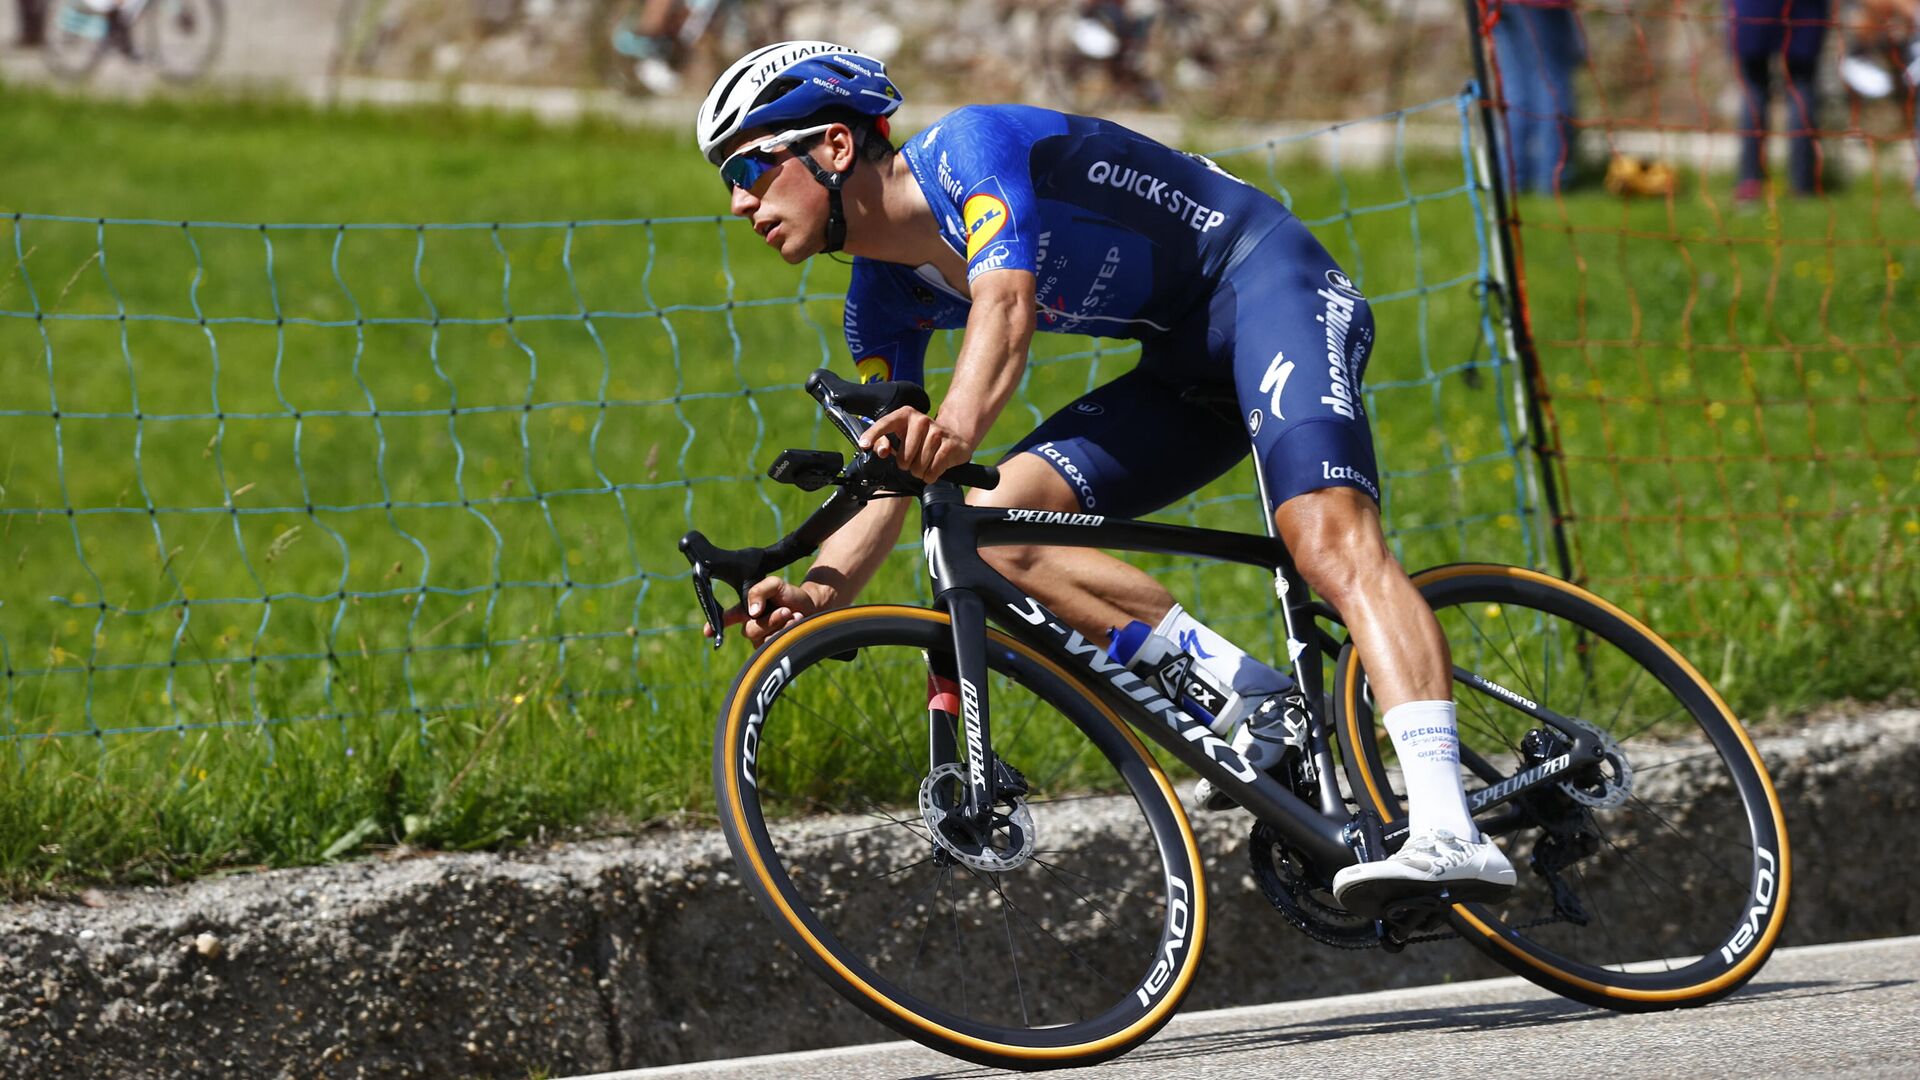 Team Deceuninck rider Portugal's Joao Almeida rides during the 19th stage of the Giro d'Italia 2021 cycling race, 166km between  Abbiategrasso and Alpe di Mera on May 28, 2021. (Photo by Luca Bettini / AFP) - РИА Новости, 1920, 15.08.2021